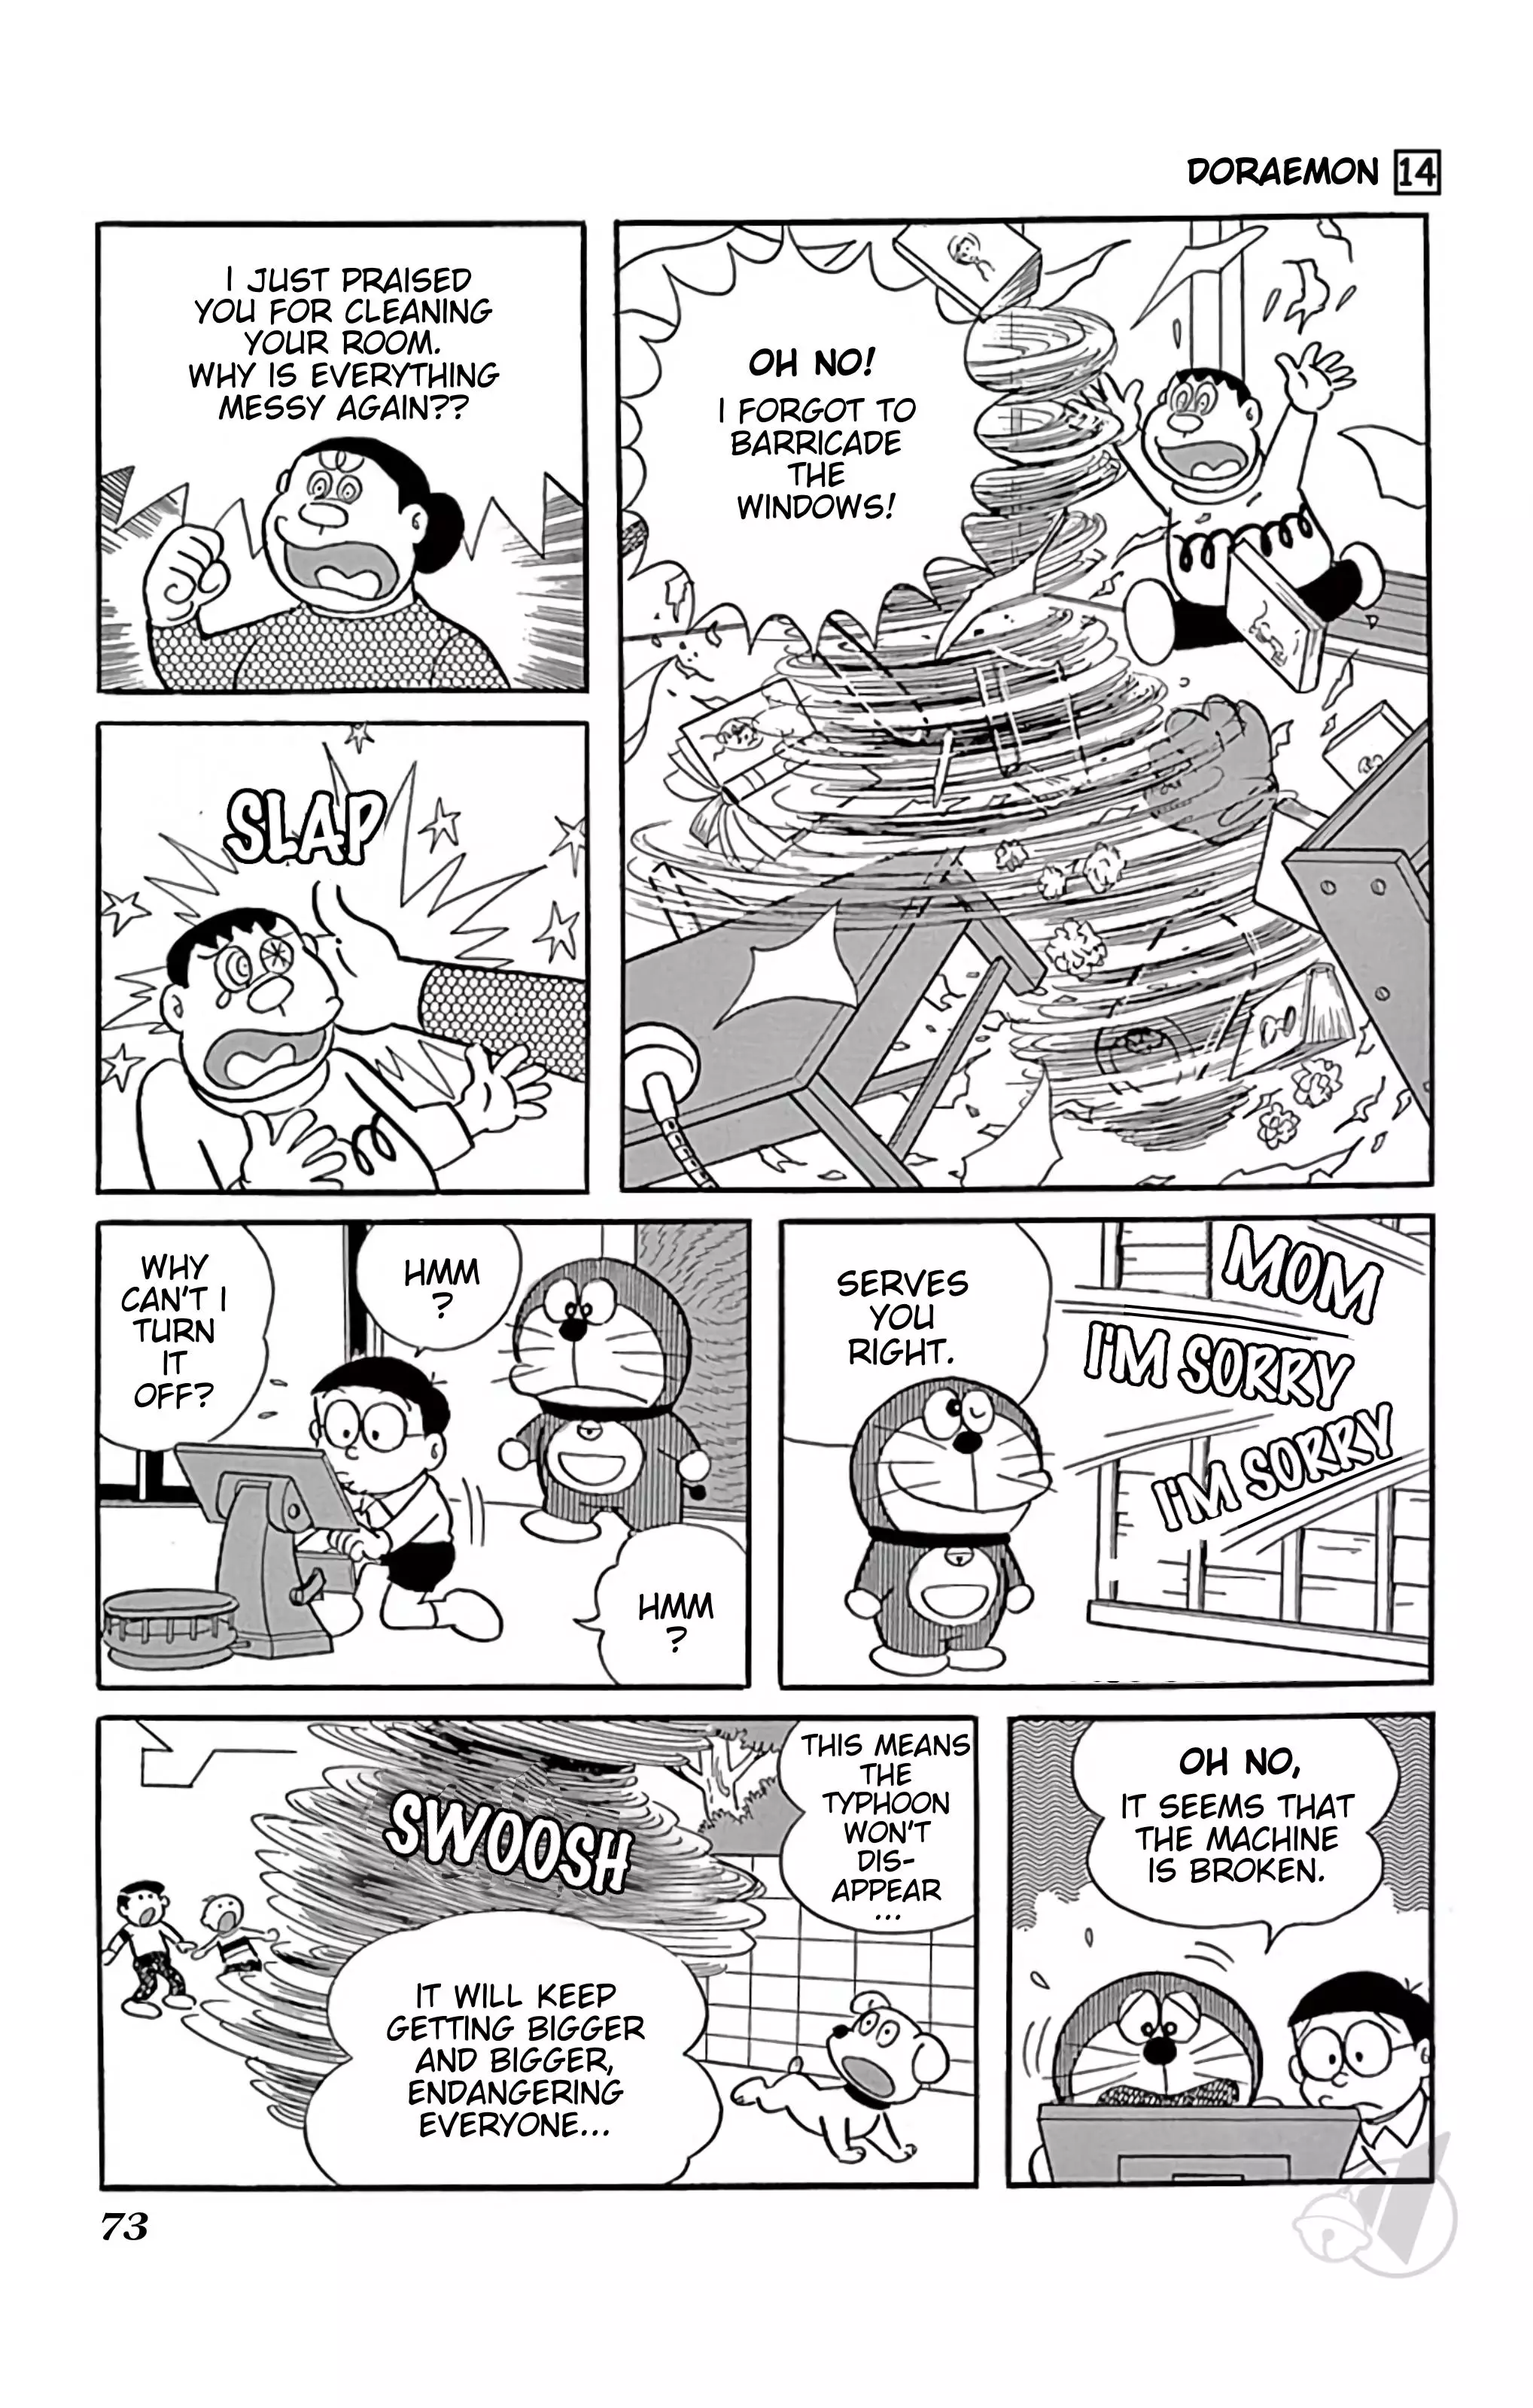 Doraemon - 254 page 7-6a4dded1